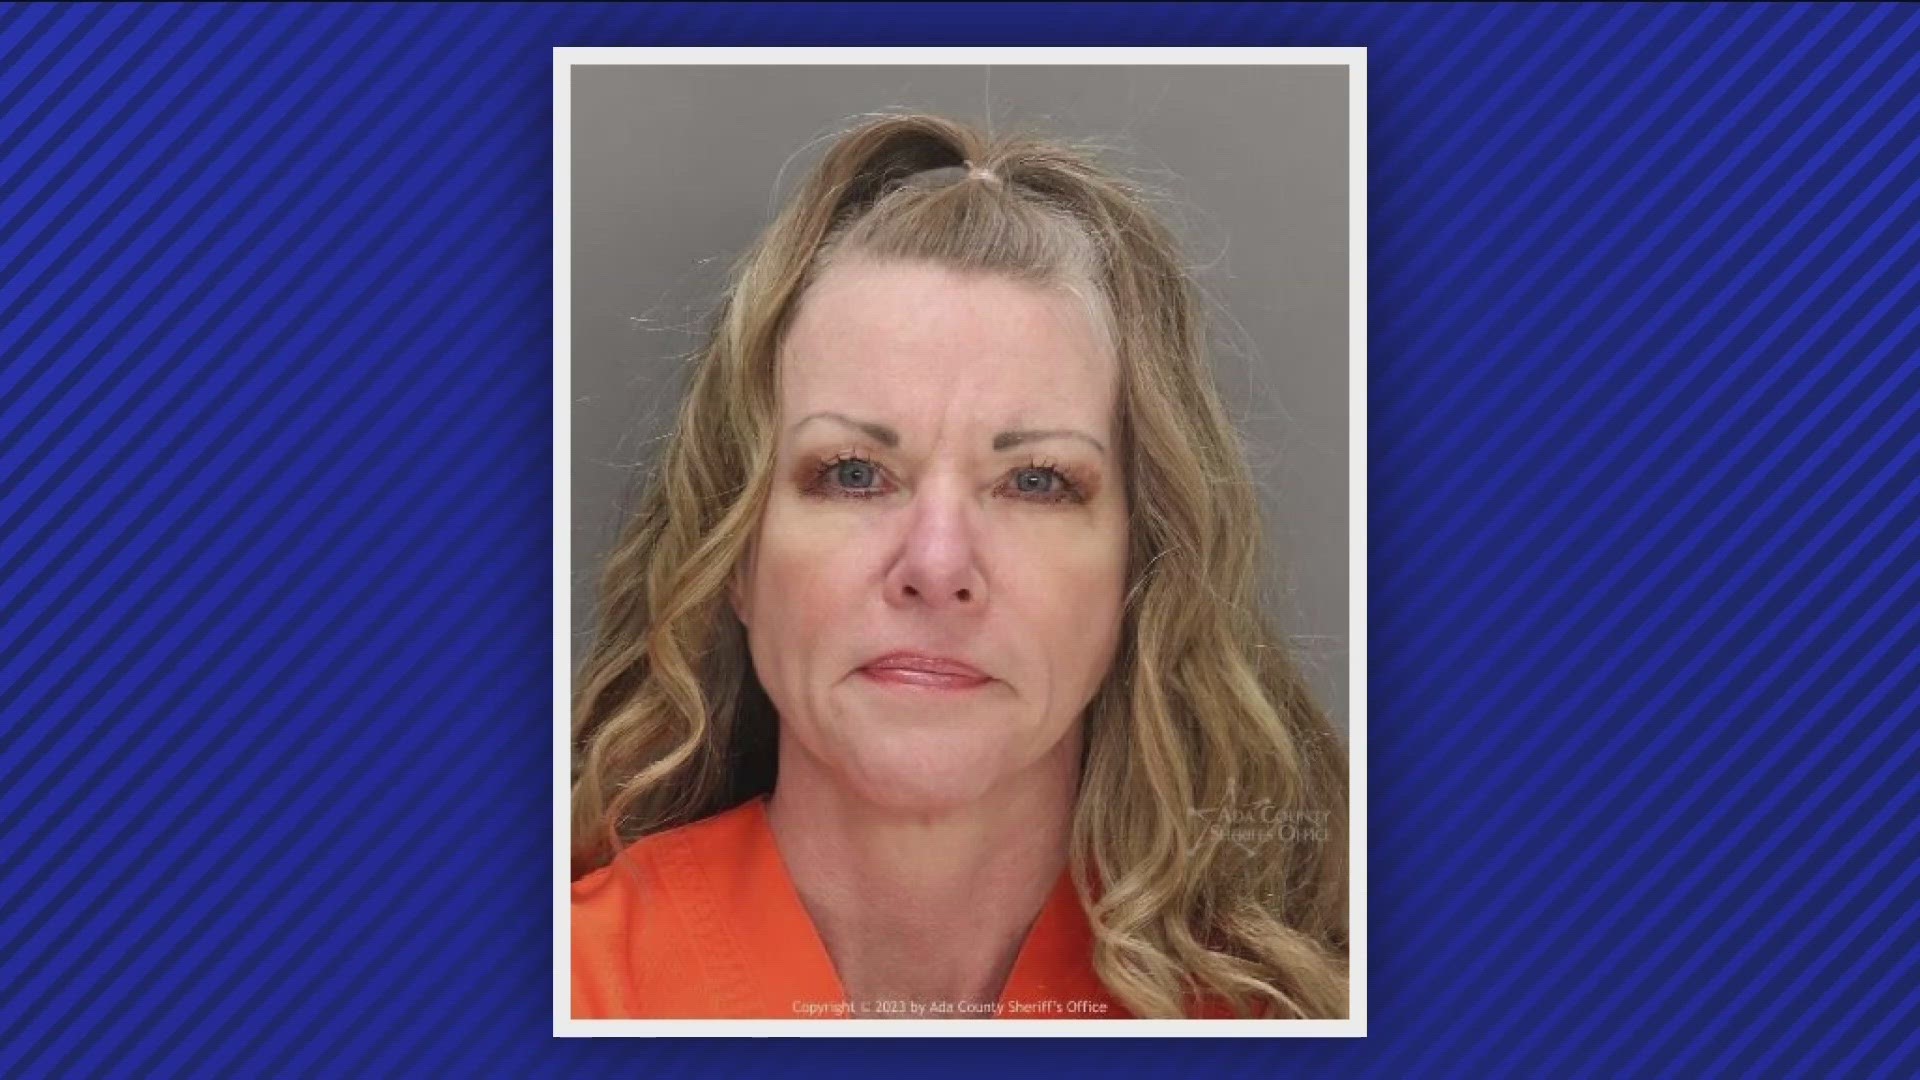 Her trial is set to take place April 3 in Ada County.